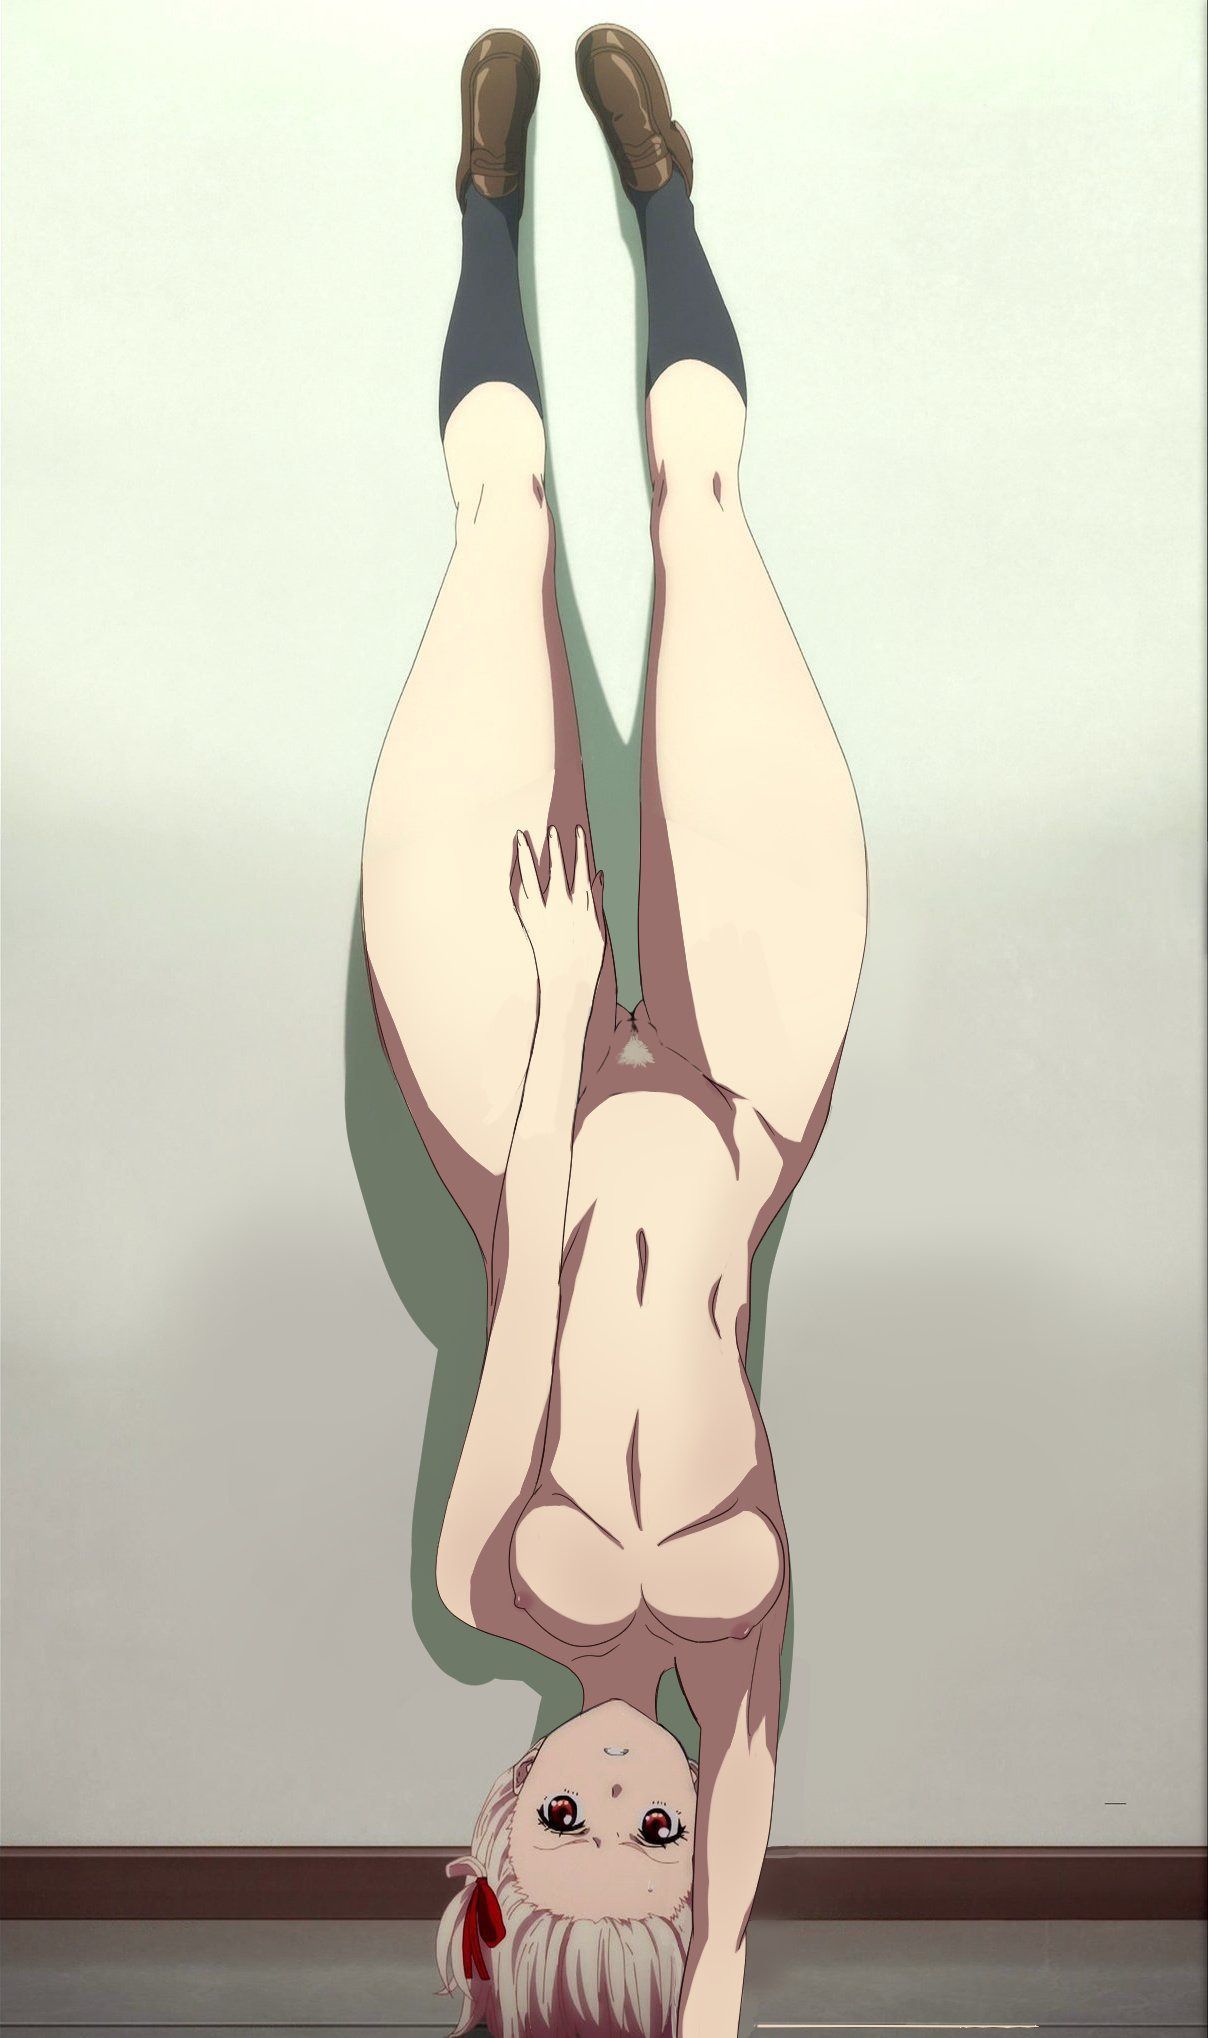 【Peel Korra】 Mass Drop of Stripped Kora Images of Official Anime Drawings Part 517 7